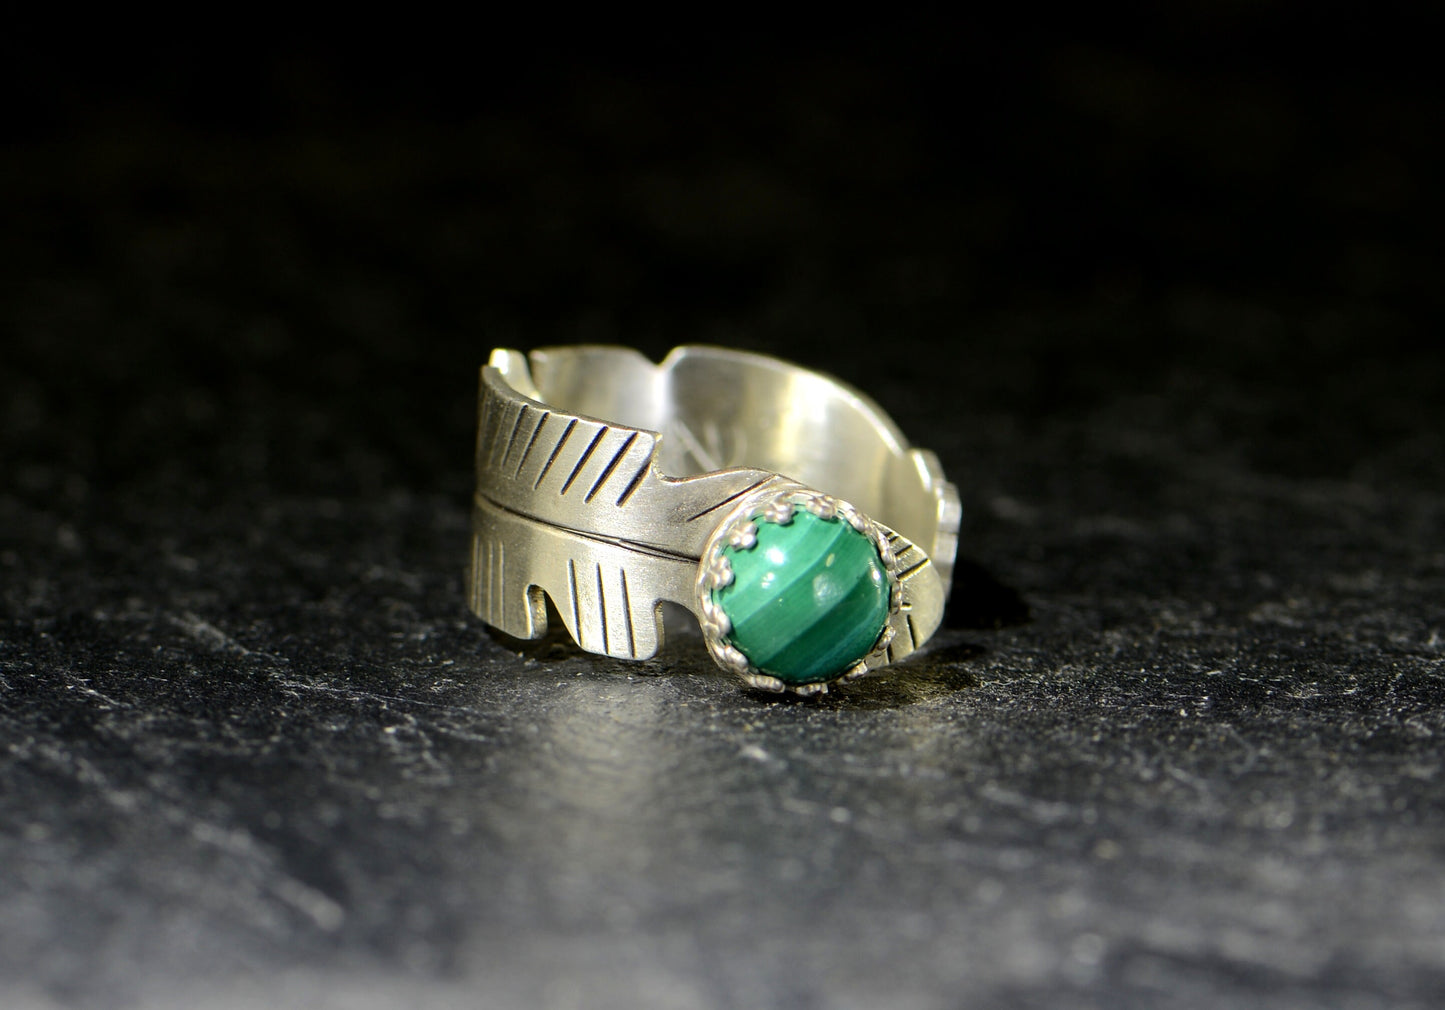 Sterling Silver Feather Wrap Ring with Malachite Stone